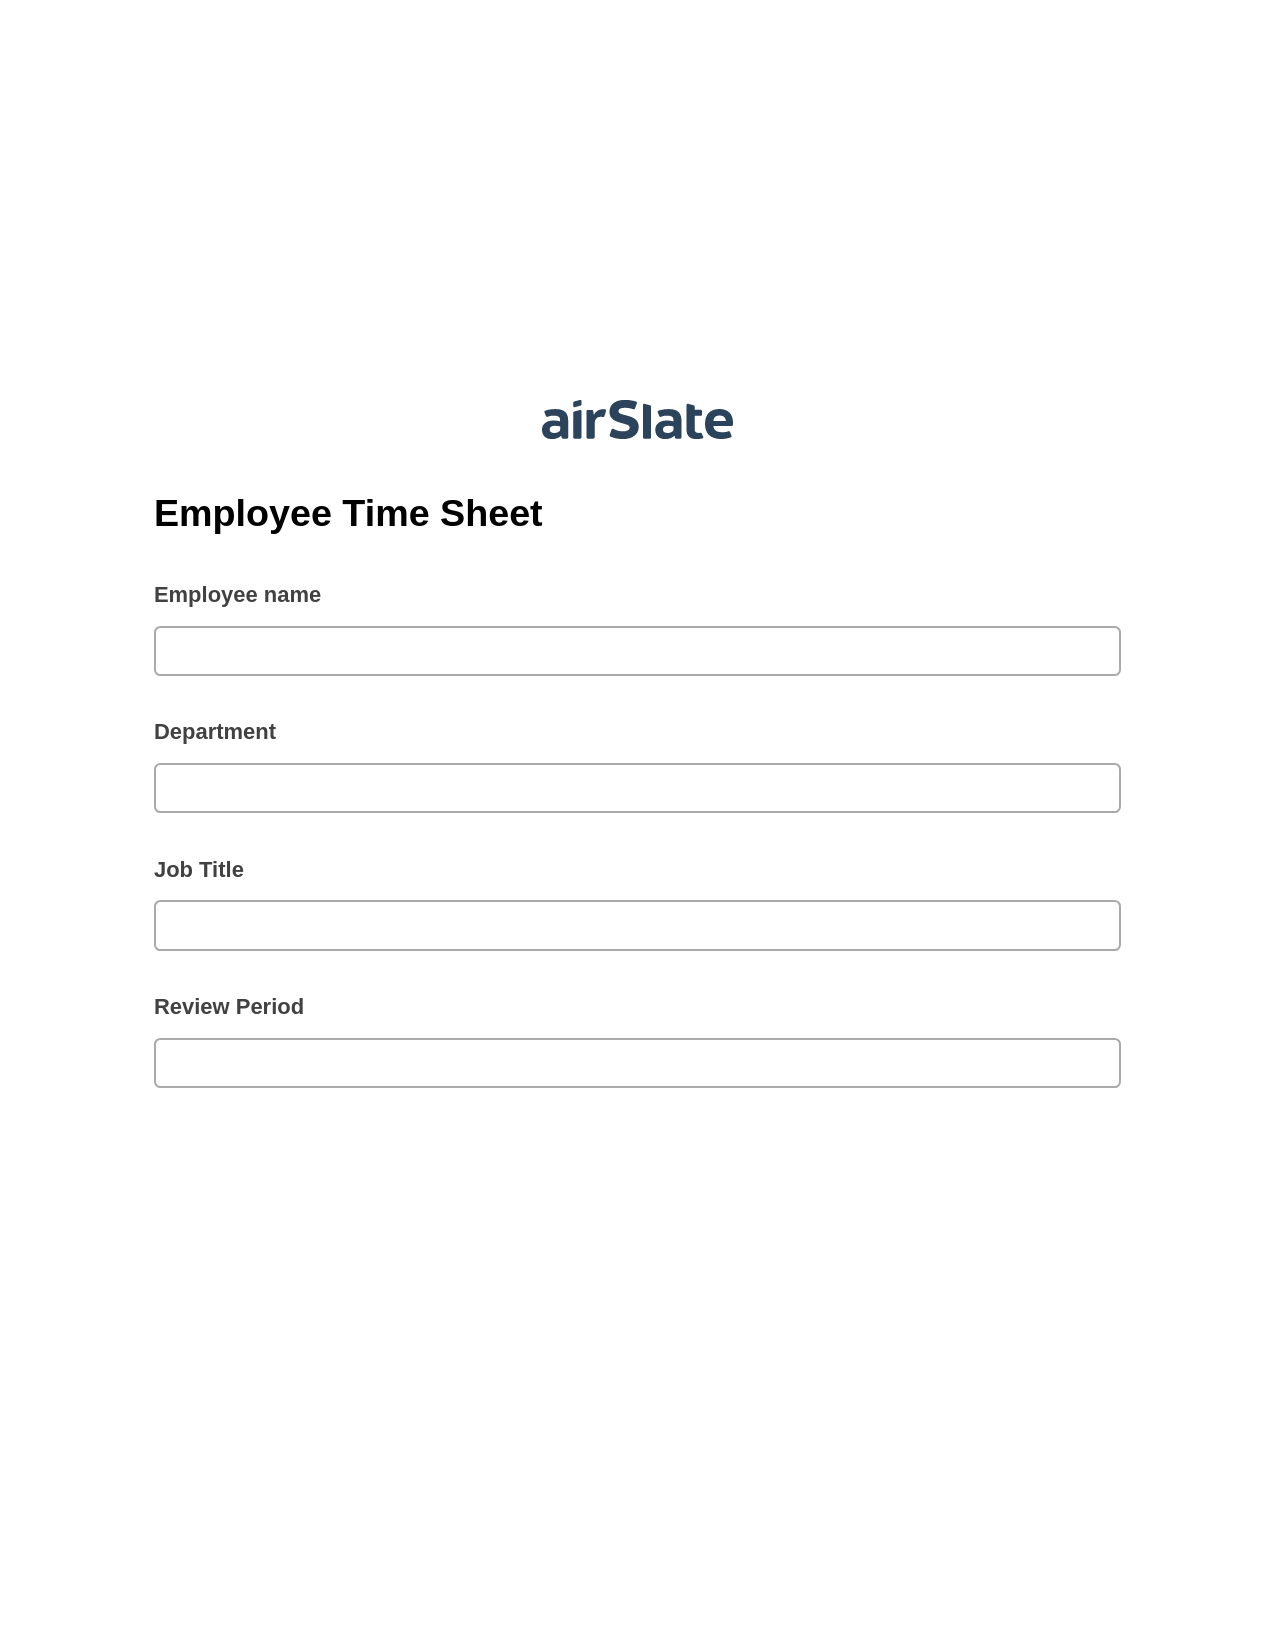 Multirole Employee Time Sheet Pre-fill from AirTable Bot, Google Cloud Print Bot, Export to Smartsheet